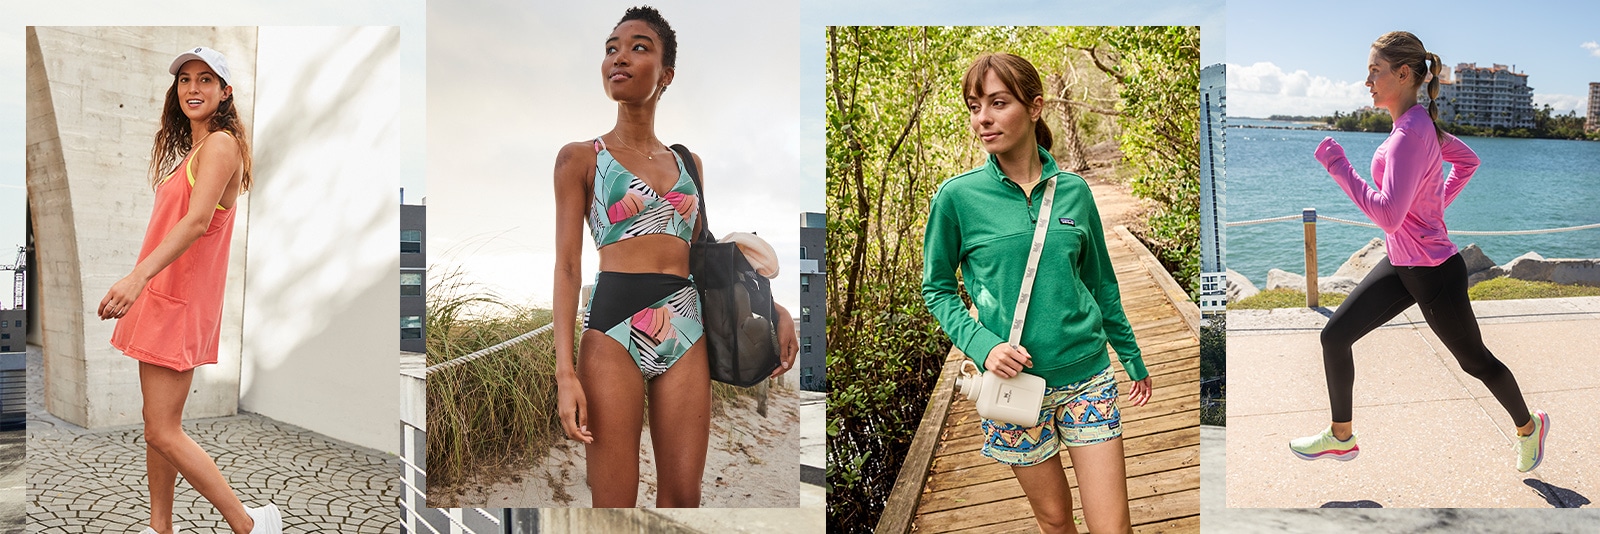 Dick's Sporting Goods Unveils Women's Activewear Line for All-Day